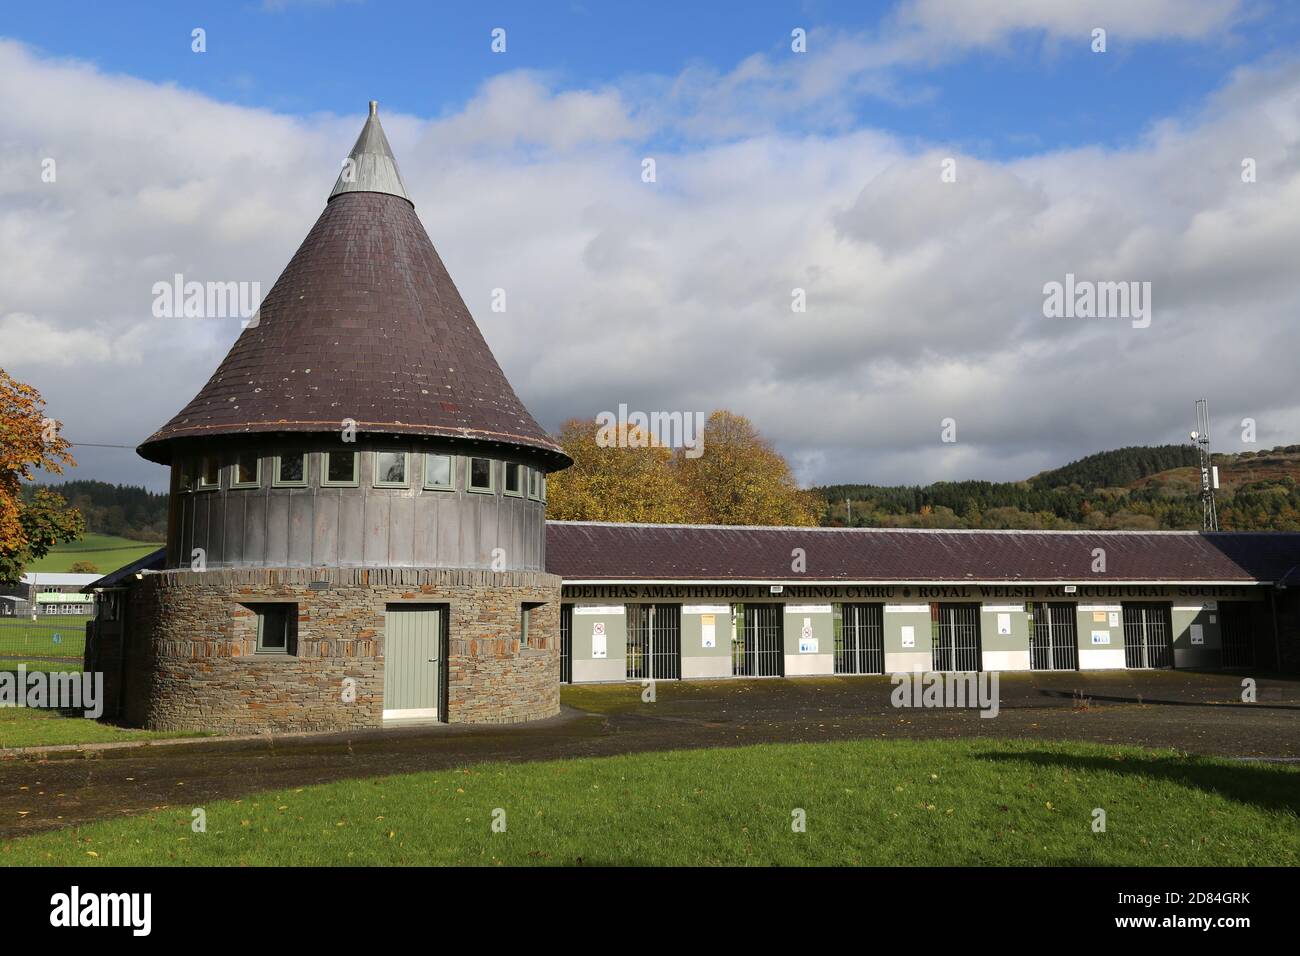 Royal Welsh Agricultural Society Showground, Llanelwedd, Builth Wells, Brecknockshire, Powys, Wales, Great Britain, United Kingdom, UK, Europe Stock Photo